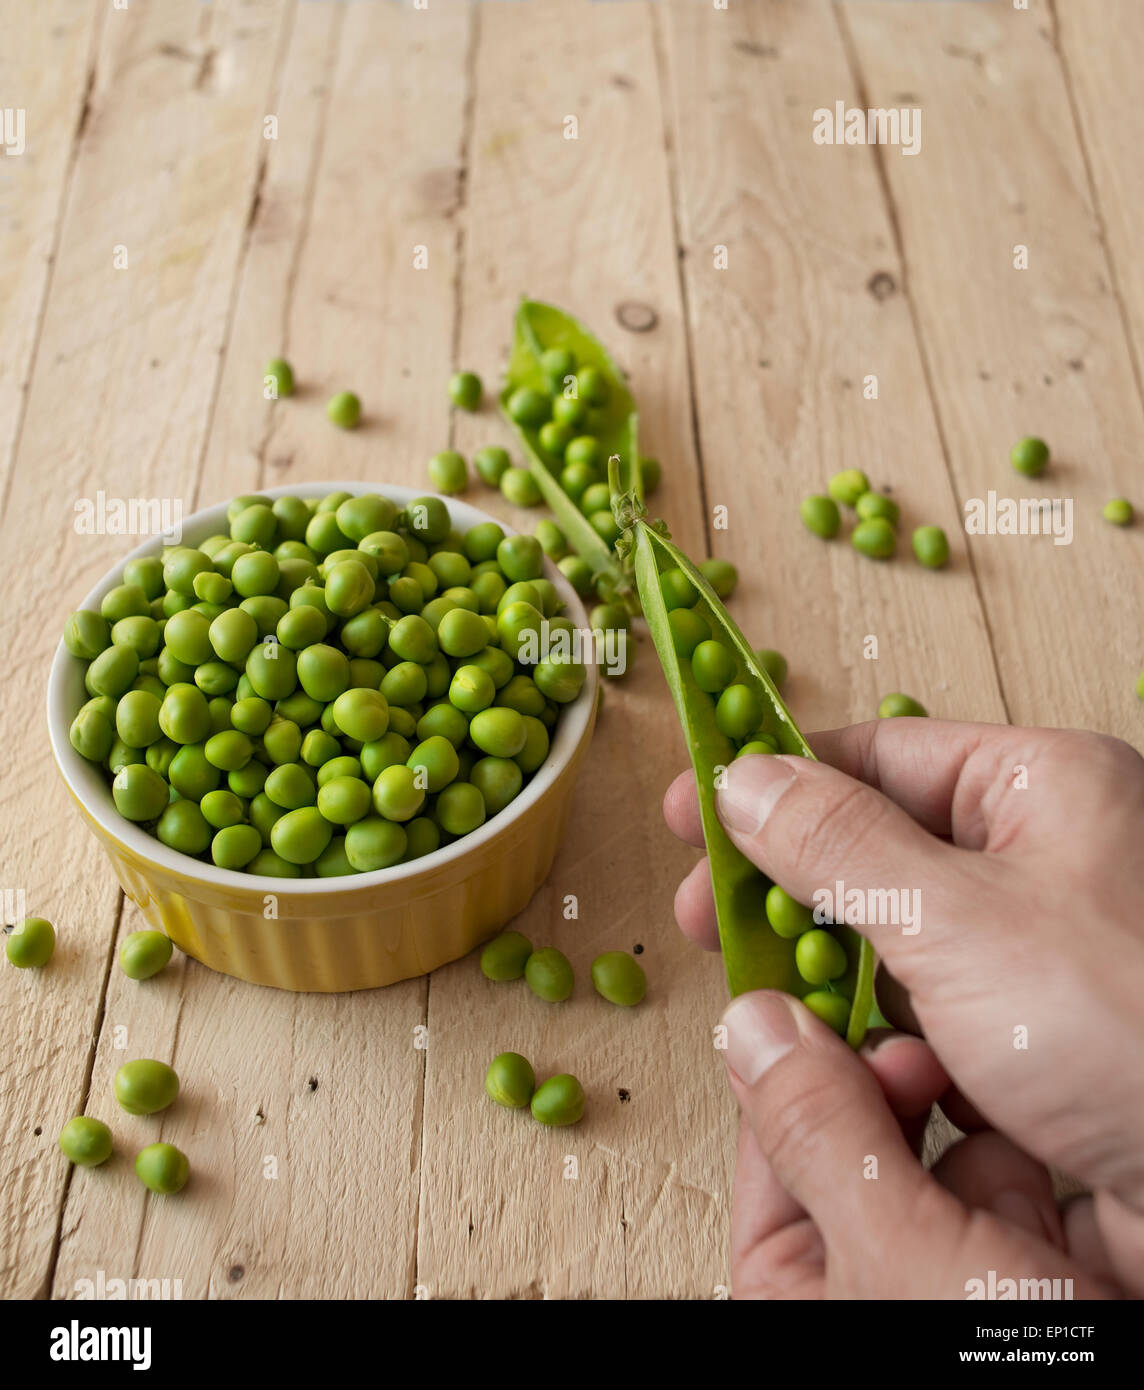 Ecological fresh green peas pods in a wooden rustic table. Stock Photo